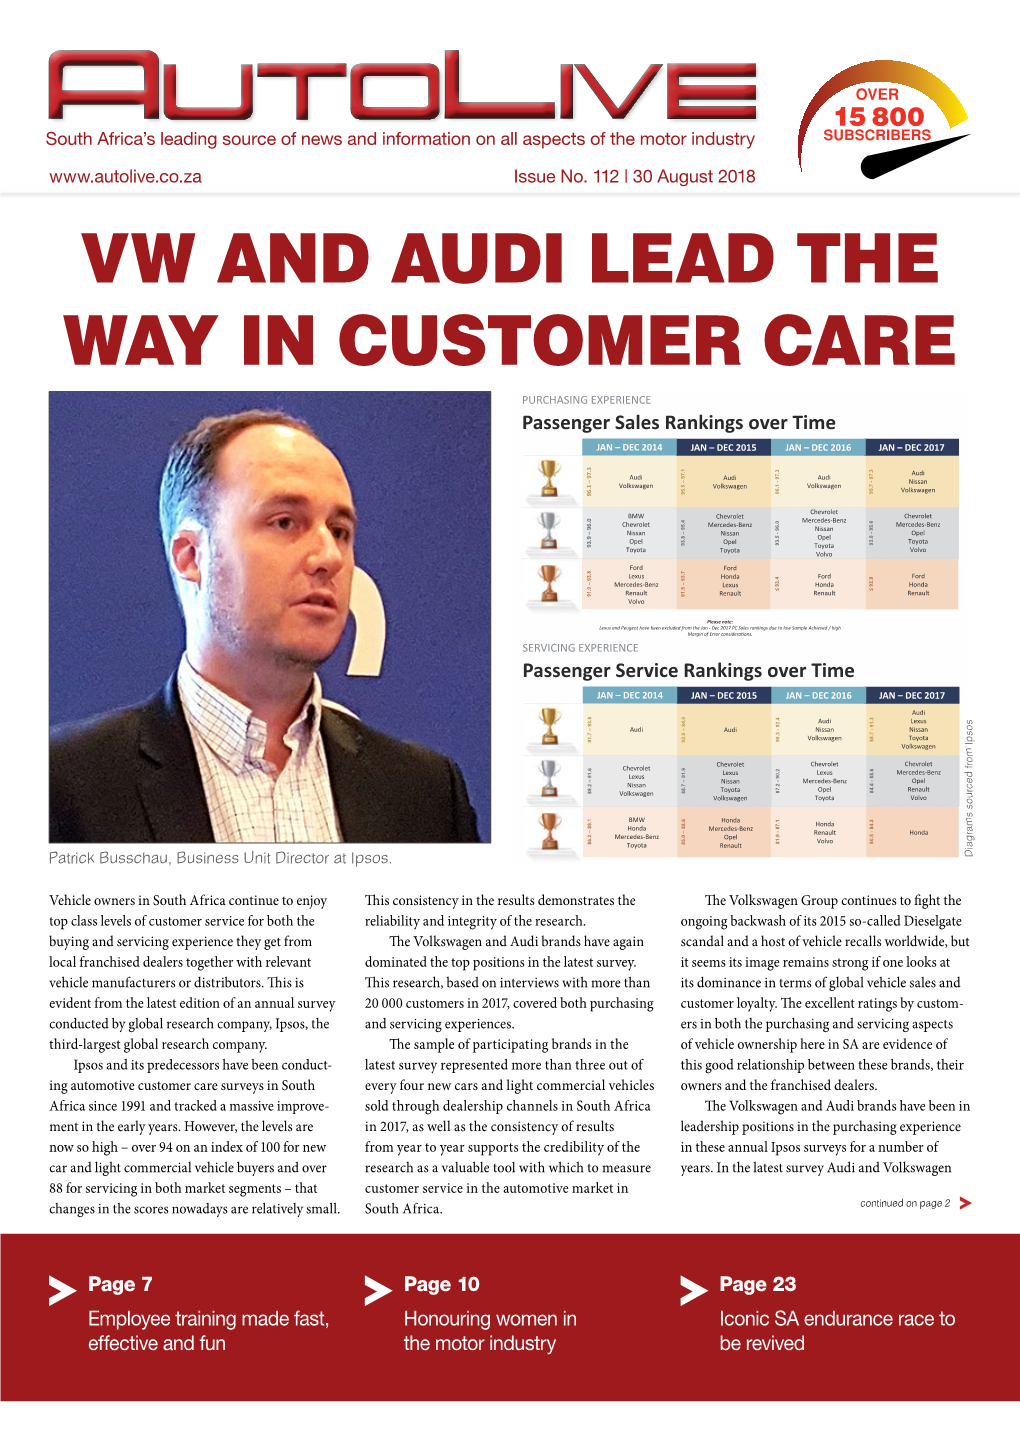 Vw and Audi Lead the Way in Customer Care